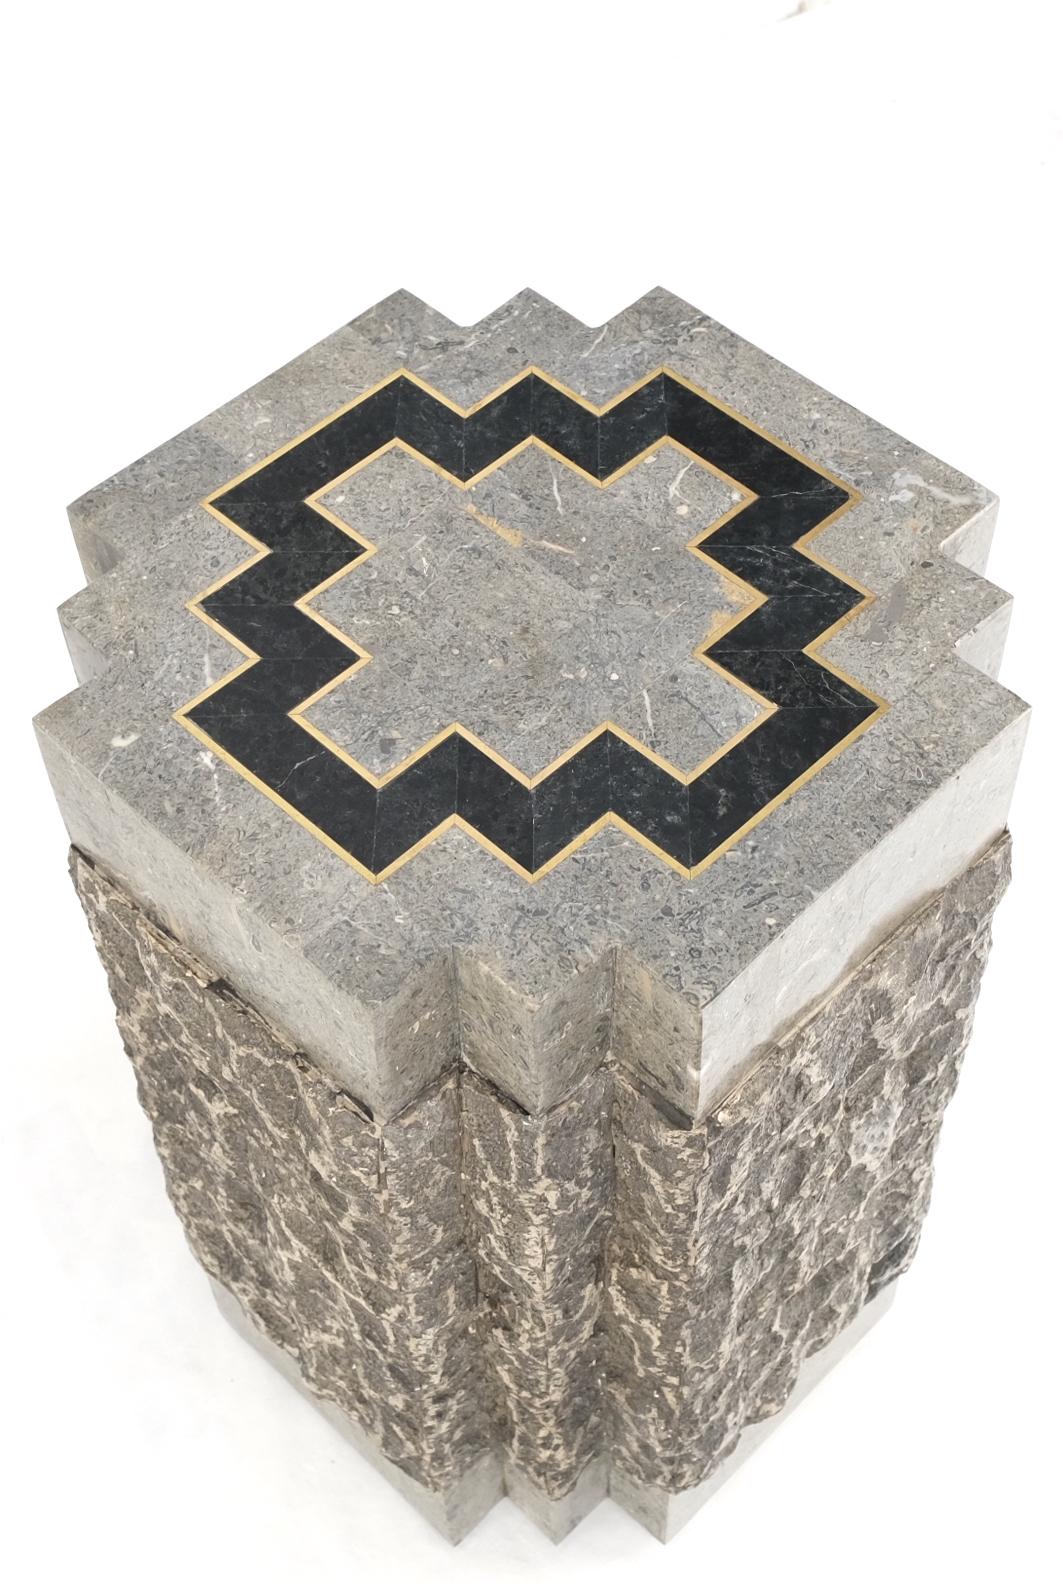 Tessellated Stone Brass Inlay Square Pedestal Stand End Table Black & Grey Mint For Sale 5